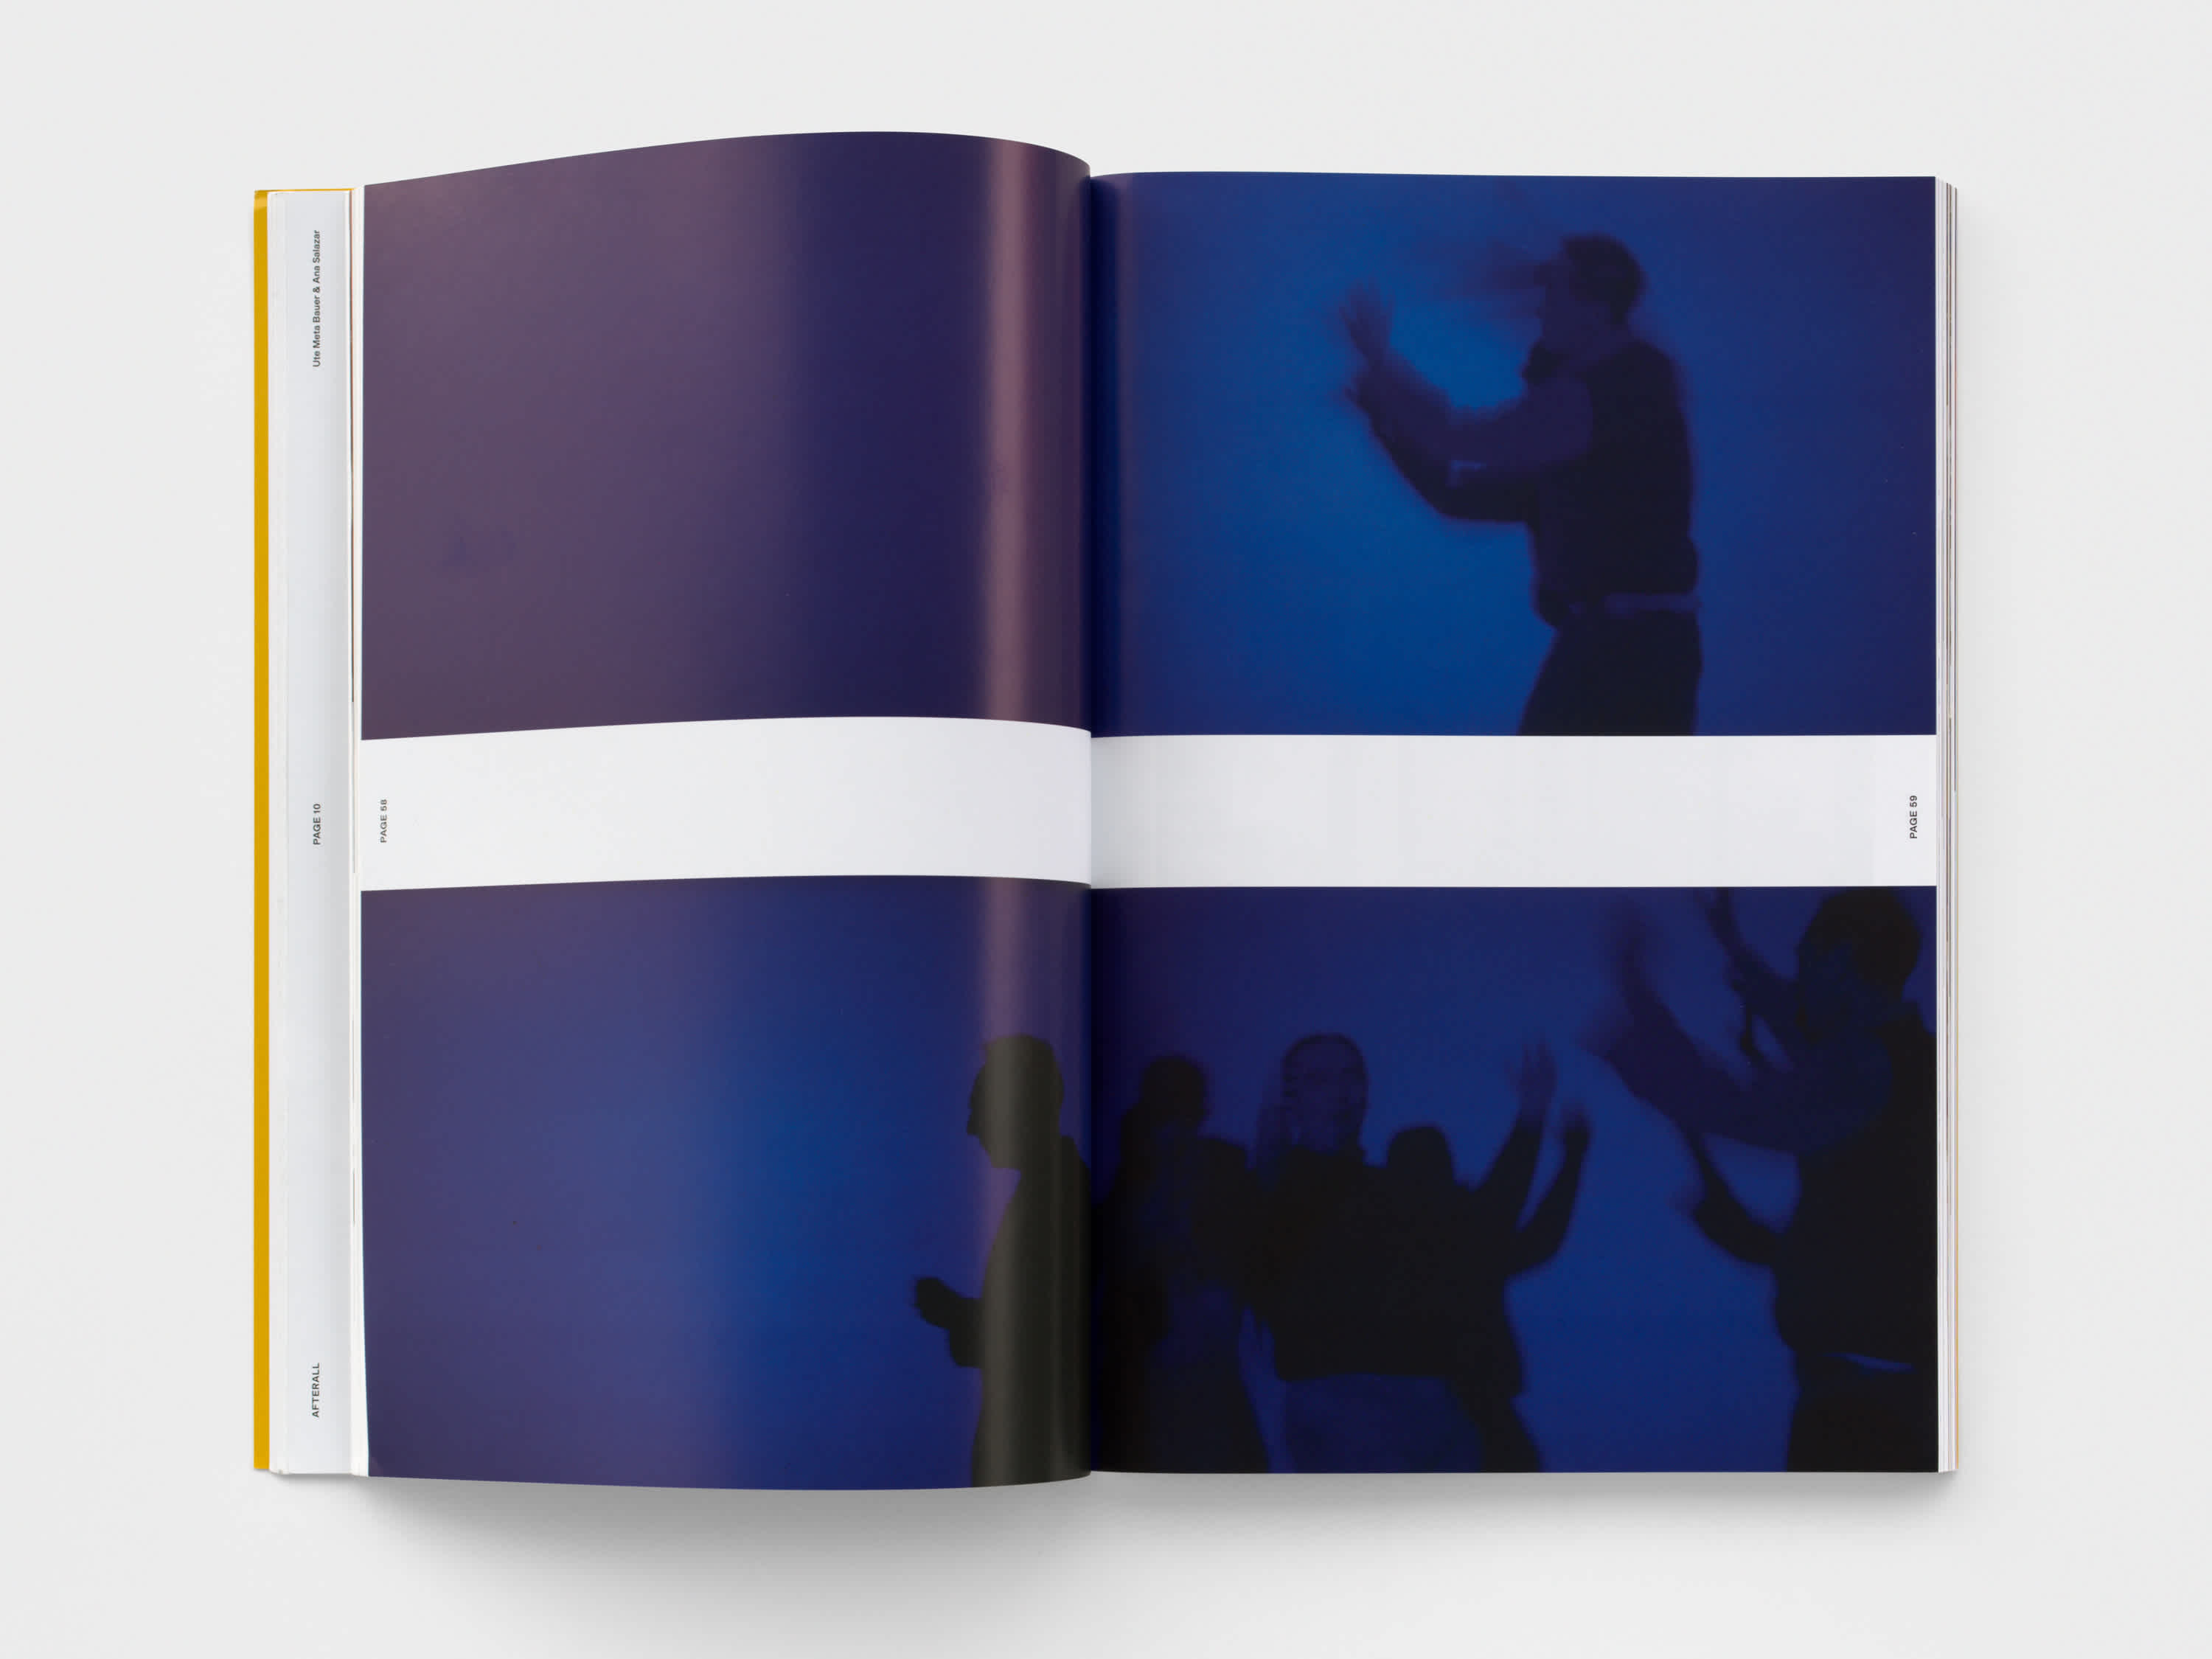 Open magazine with purple-blue centerfold image. A white band runs horizontally through the middle of the two pages.